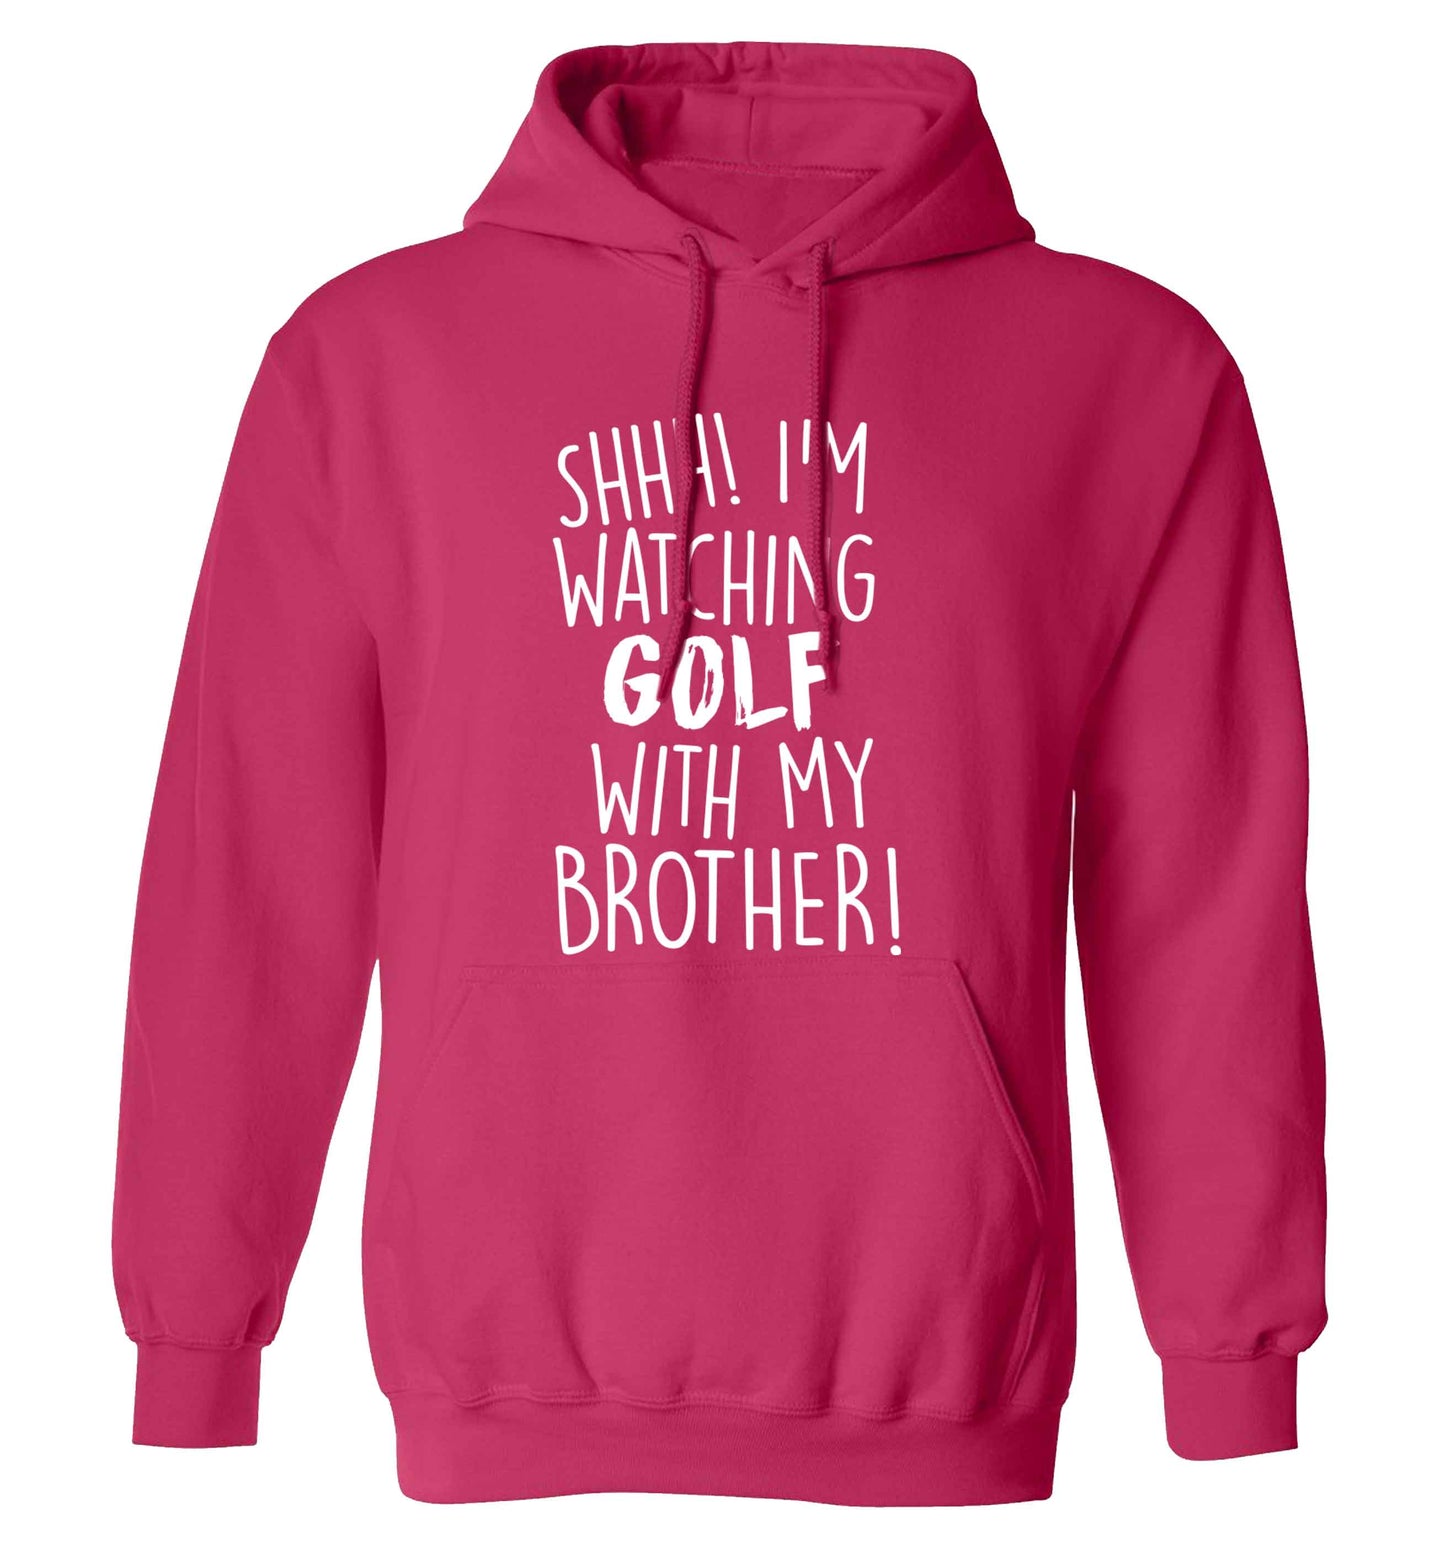 Shh I'm watching golf with my brother adults unisex pink hoodie 2XL